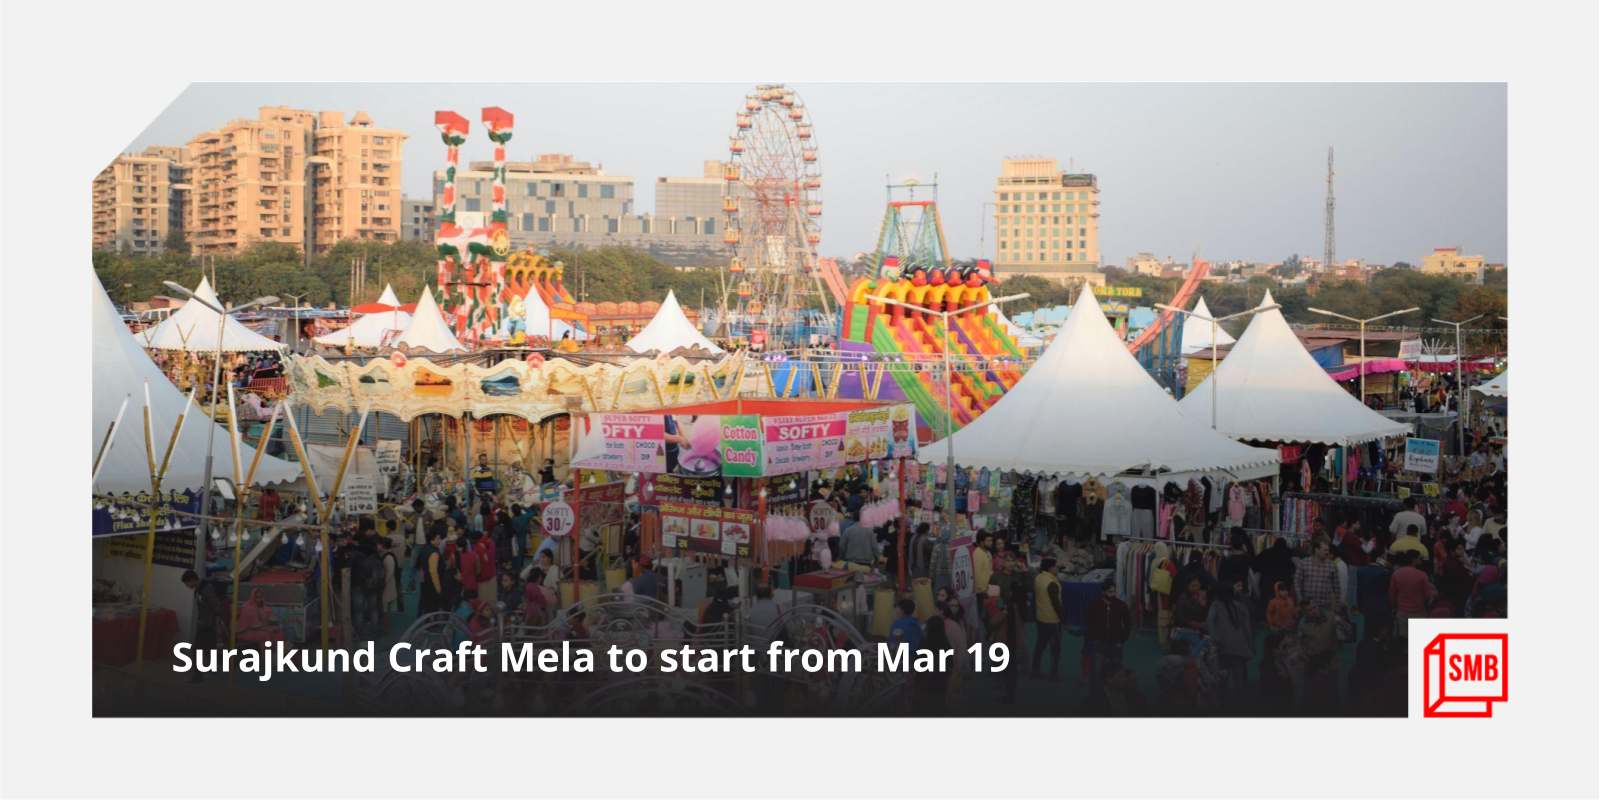 After two years hiatus, Surajkund Crafts Mela to start from March 19, 20 countries to participate